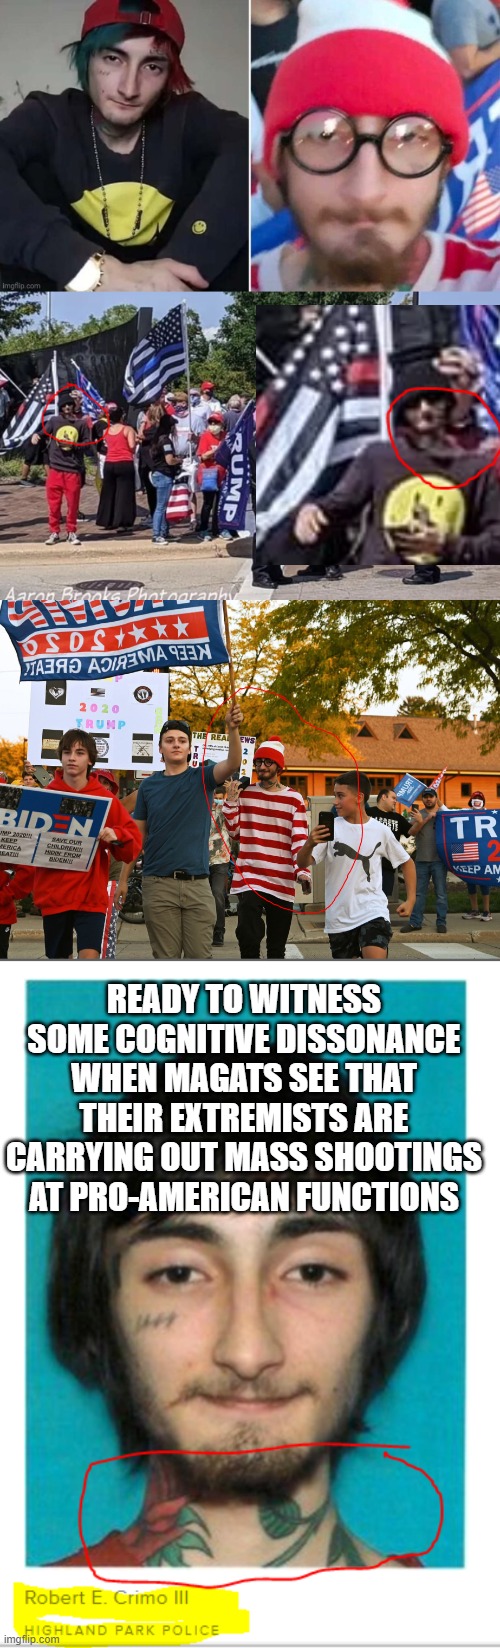 Are we *really* the anti-Americans...? | READY TO WITNESS SOME COGNITIVE DISSONANCE WHEN MAGATS SEE THAT THEIR EXTREMISTS ARE CARRYING OUT MASS SHOOTINGS AT PRO-AMERICAN FUNCTIONS | image tagged in parkland,shooting,maga,terrorist,strikes again,2a reform | made w/ Imgflip meme maker